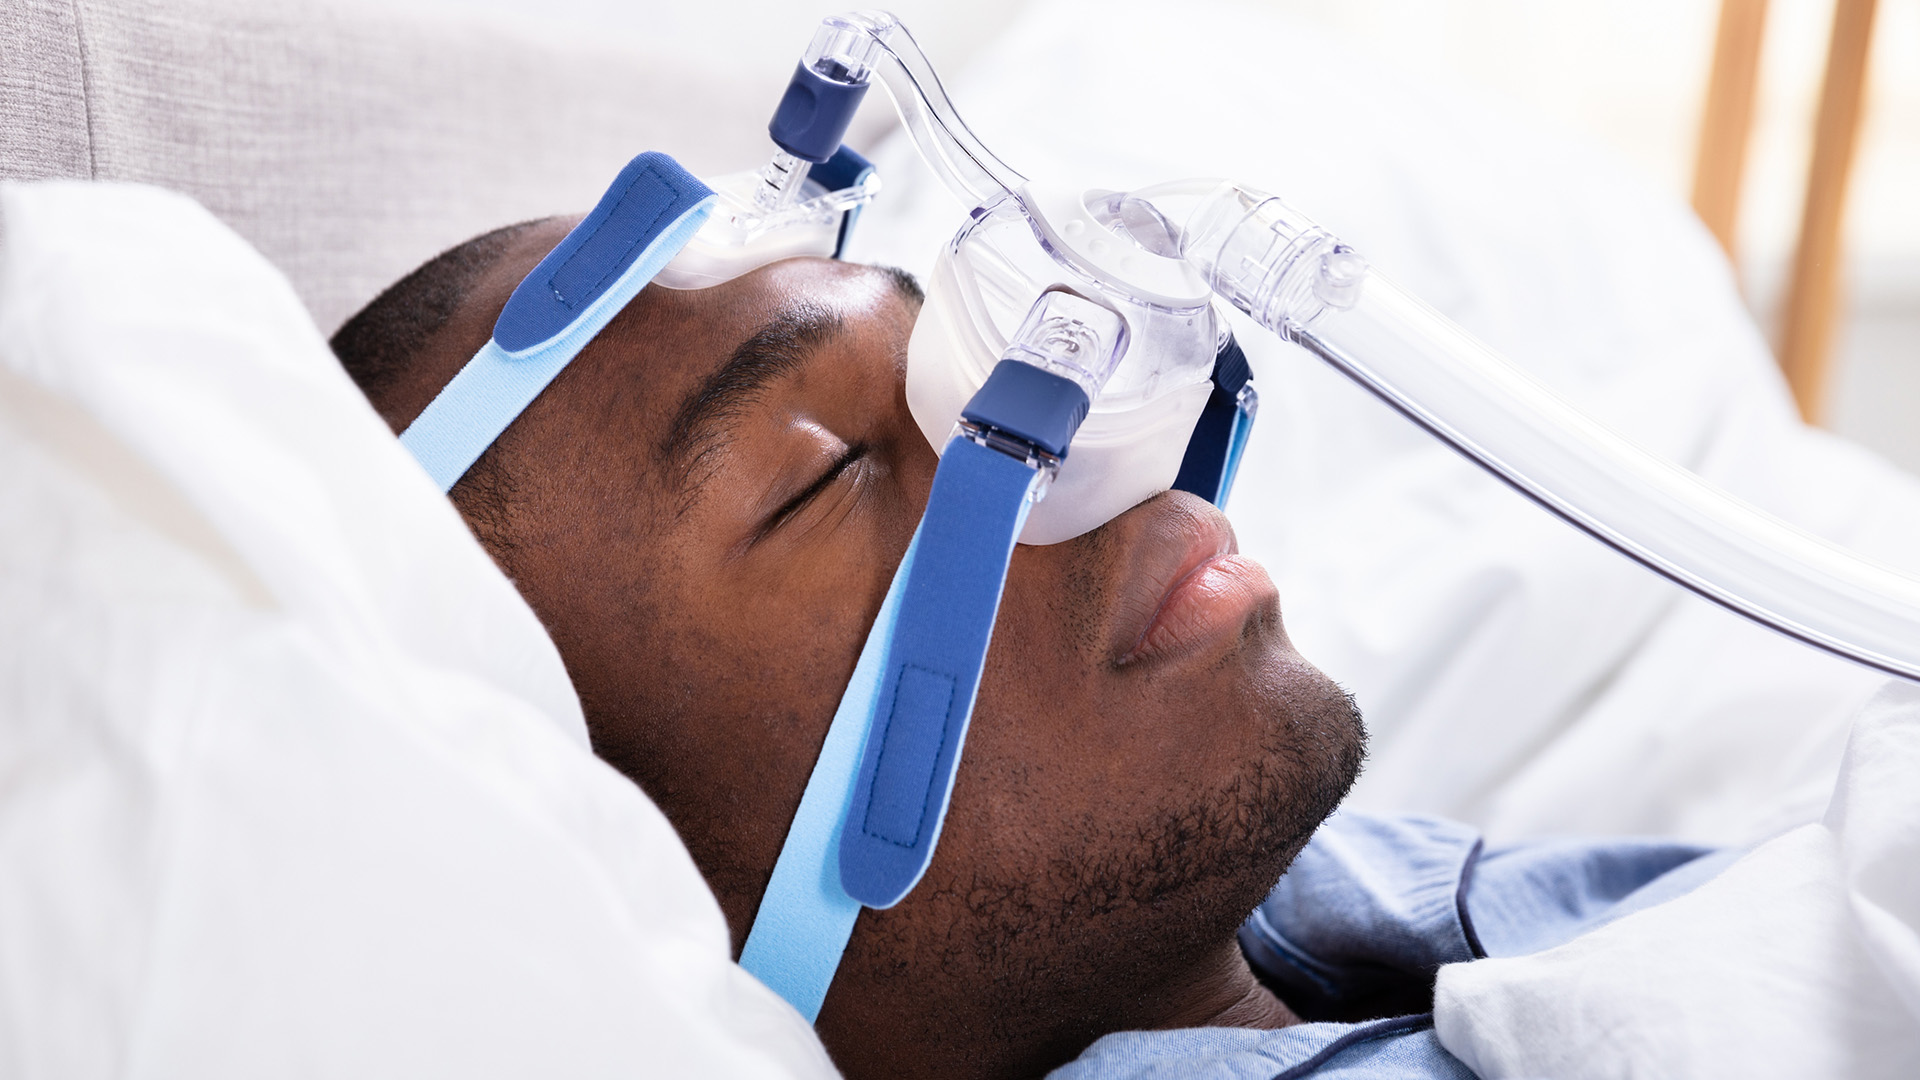 All May Not Be Equal in Sleep Apnea Research: New Data Shows Black Patients May Be Underrepresented